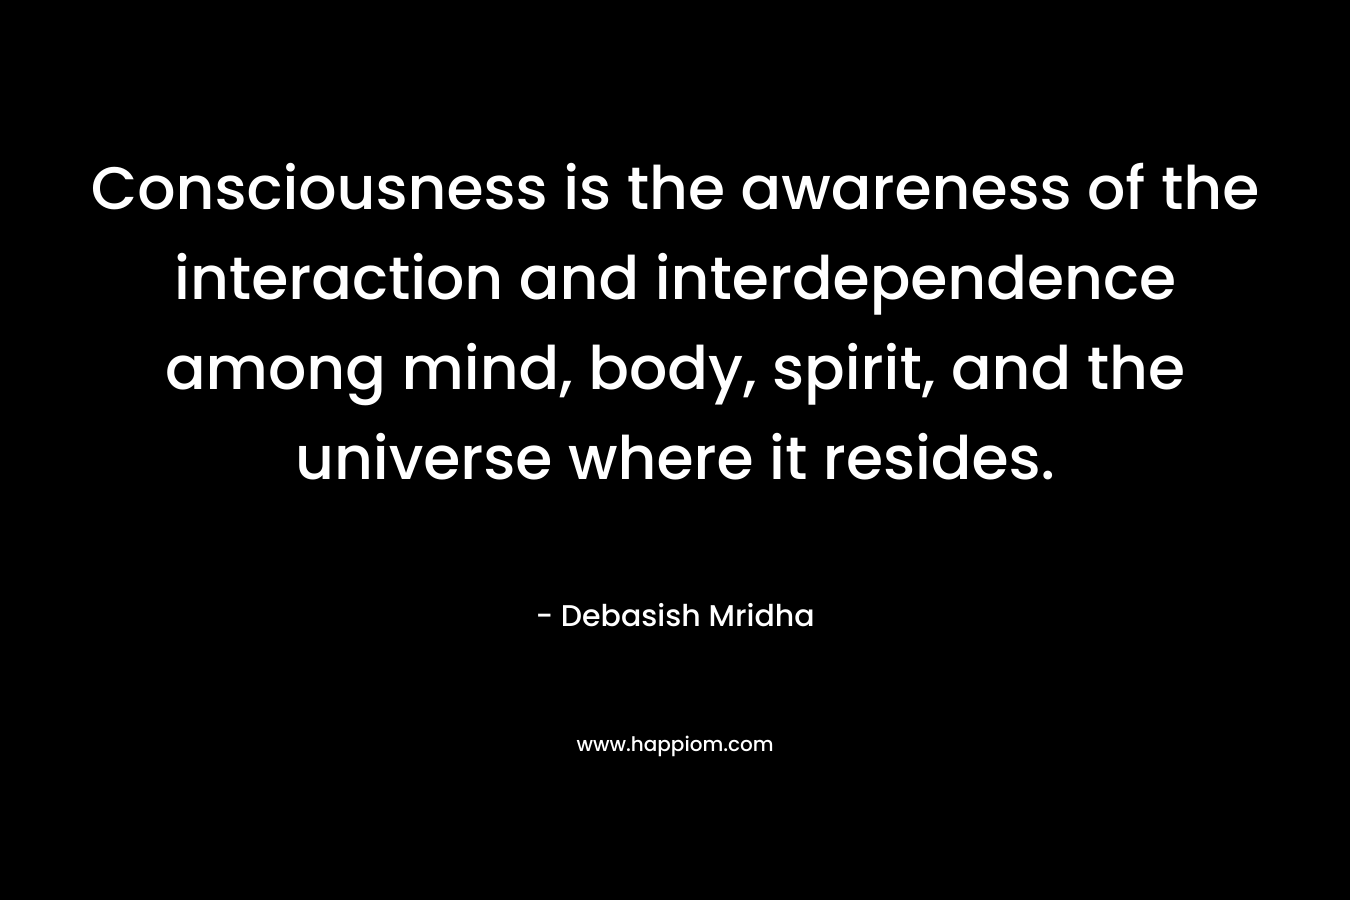 Consciousness is the awareness of the interaction and interdependence among mind, body, spirit, and the universe where it resides.